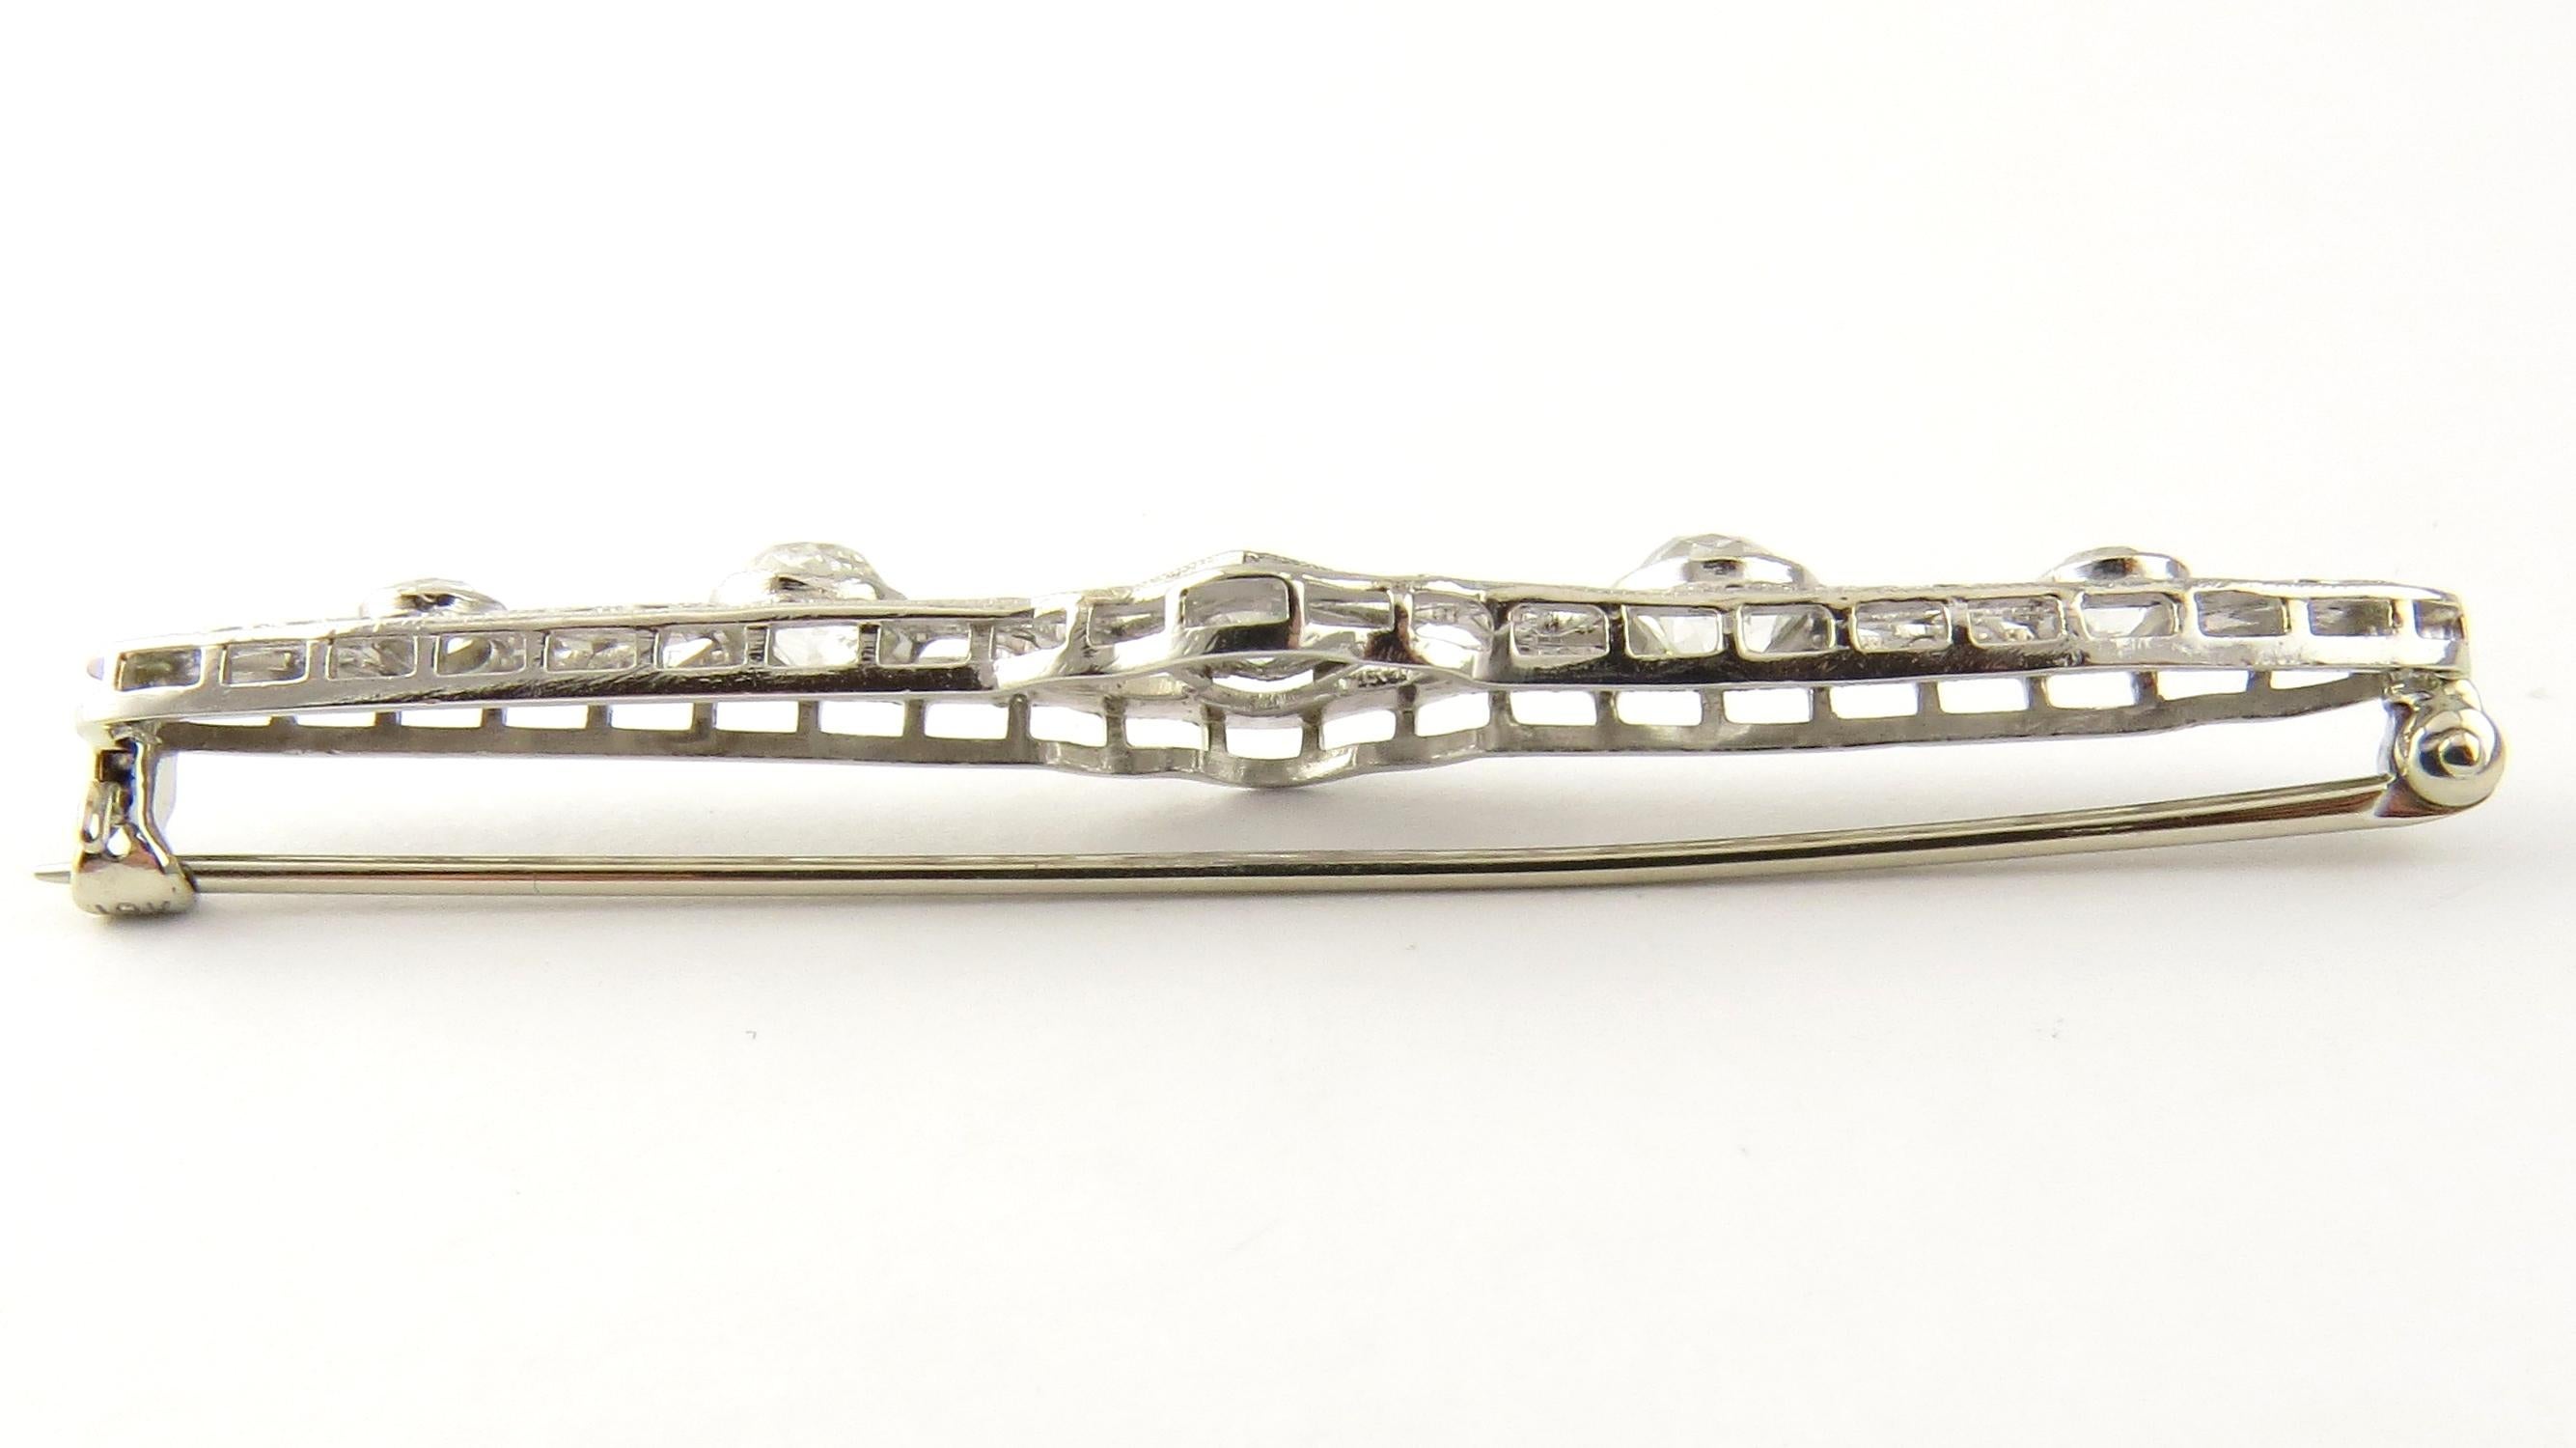 Vintage 18 Karat White Gold Filigree and Diamond Bar Pin

This exquisite bar pin features five old mine cut diamonds (center: .20 ct., sides: .30 ct. each, ends: .10 ct. each) set in beautifully detailed white gold filigree.

Approximate total